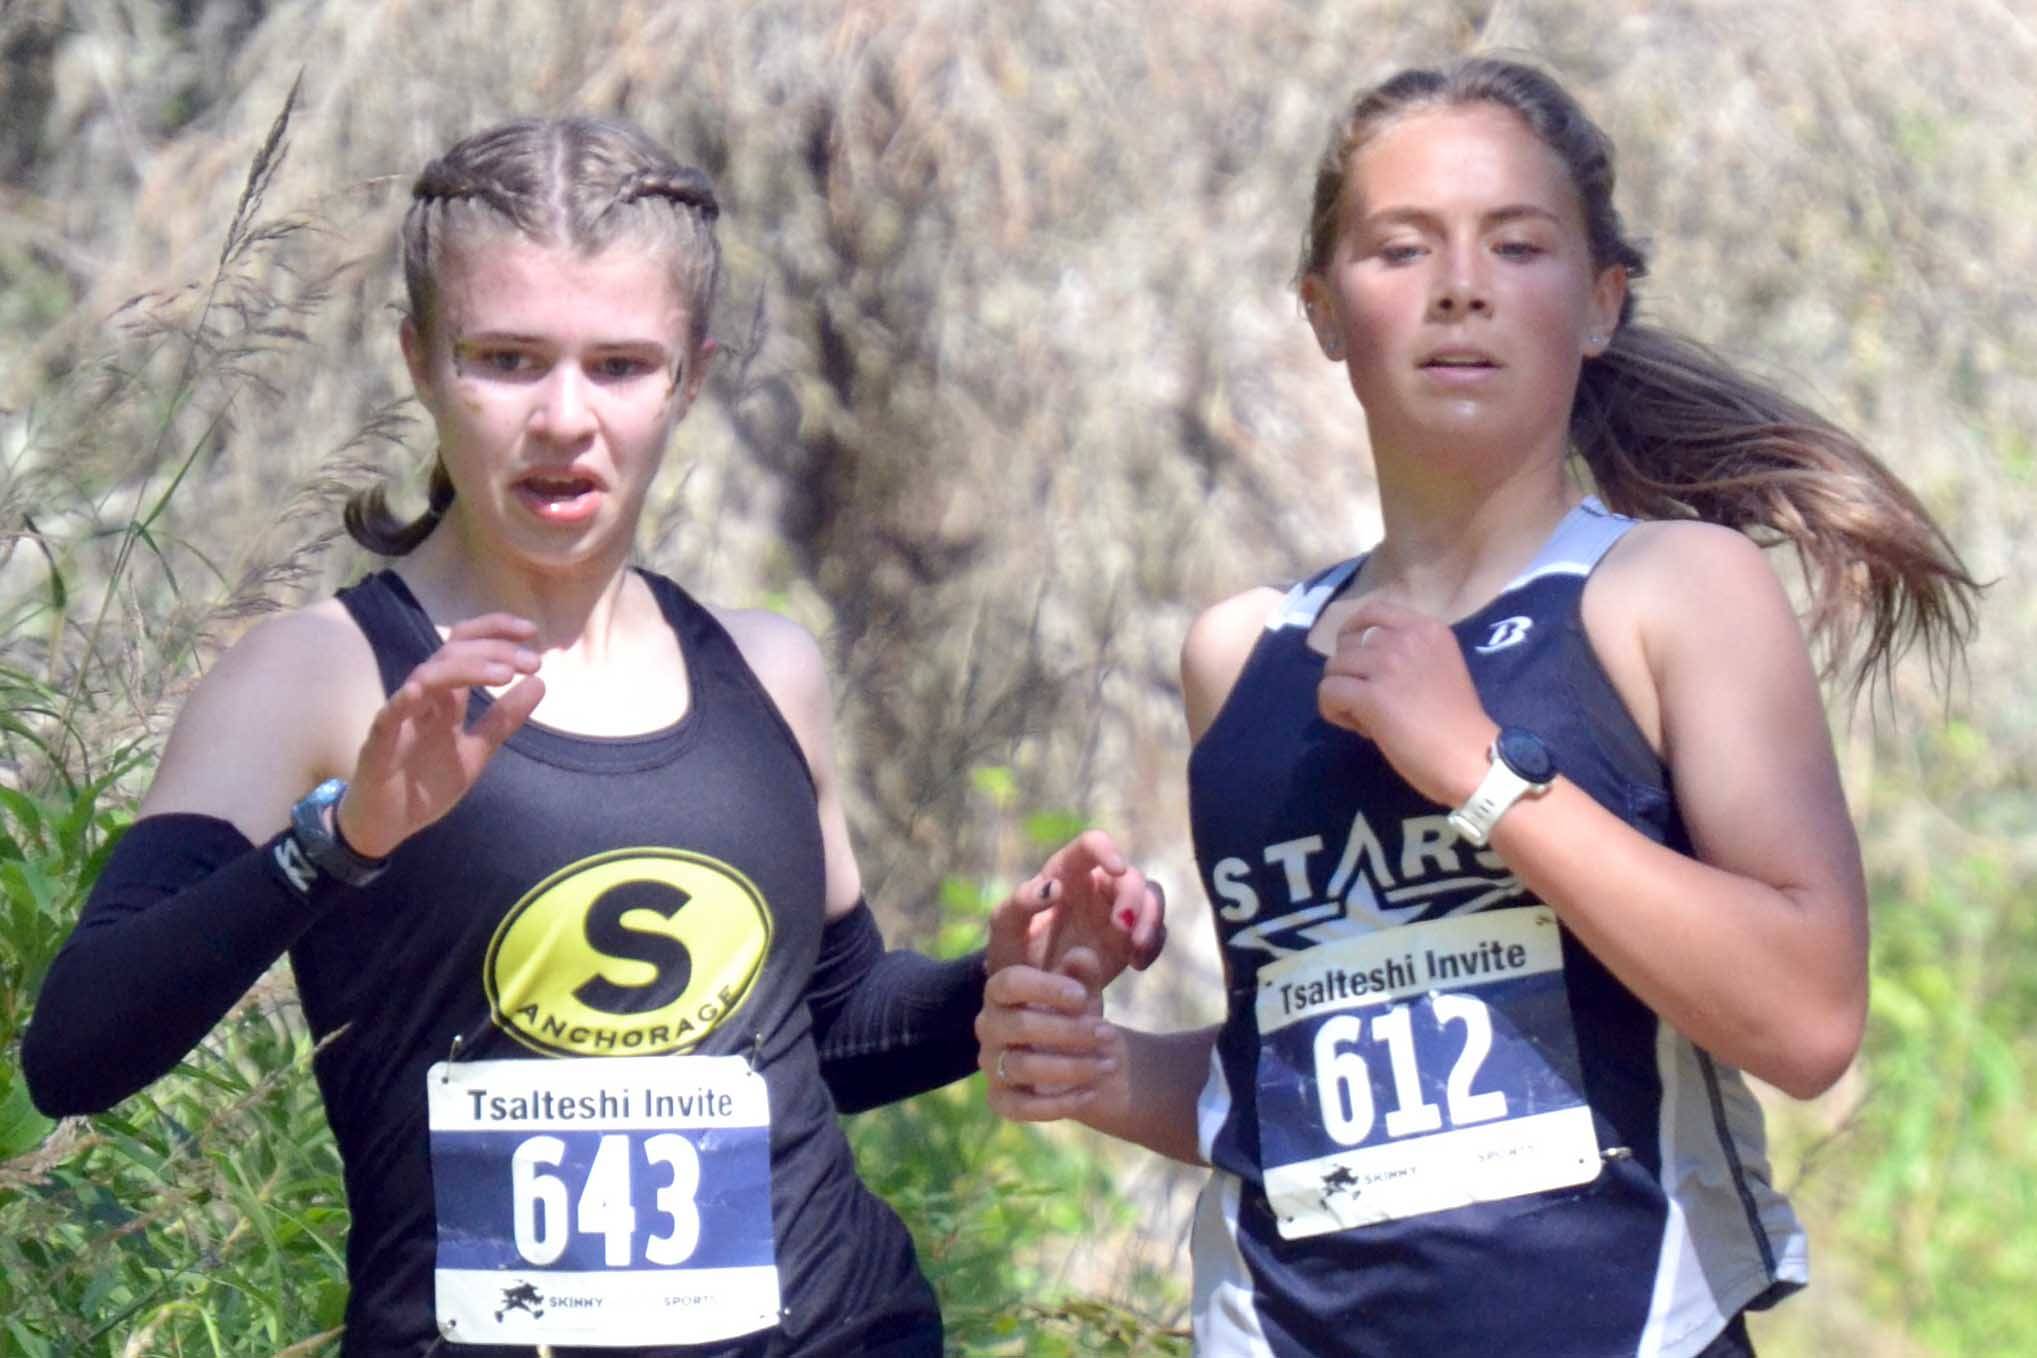 Soldotna's Jordan Strausbaugh races to 17th place in the girls varsity race at the Ted McKenney XC Invitational on Saturday, Aug. 21, 2021, at Tsalteshi Trails just outside of Soldotna, Alaska. "We run for Ted" is written on Strausbaugh's thigh in honor of former Soldotna coach Ted McKenney. Strausbaugh runs with South's Elizabeth Page and Eagle River's Ava Trembath. (Photo by Jeff Helminiak/Peninsula Clarion)